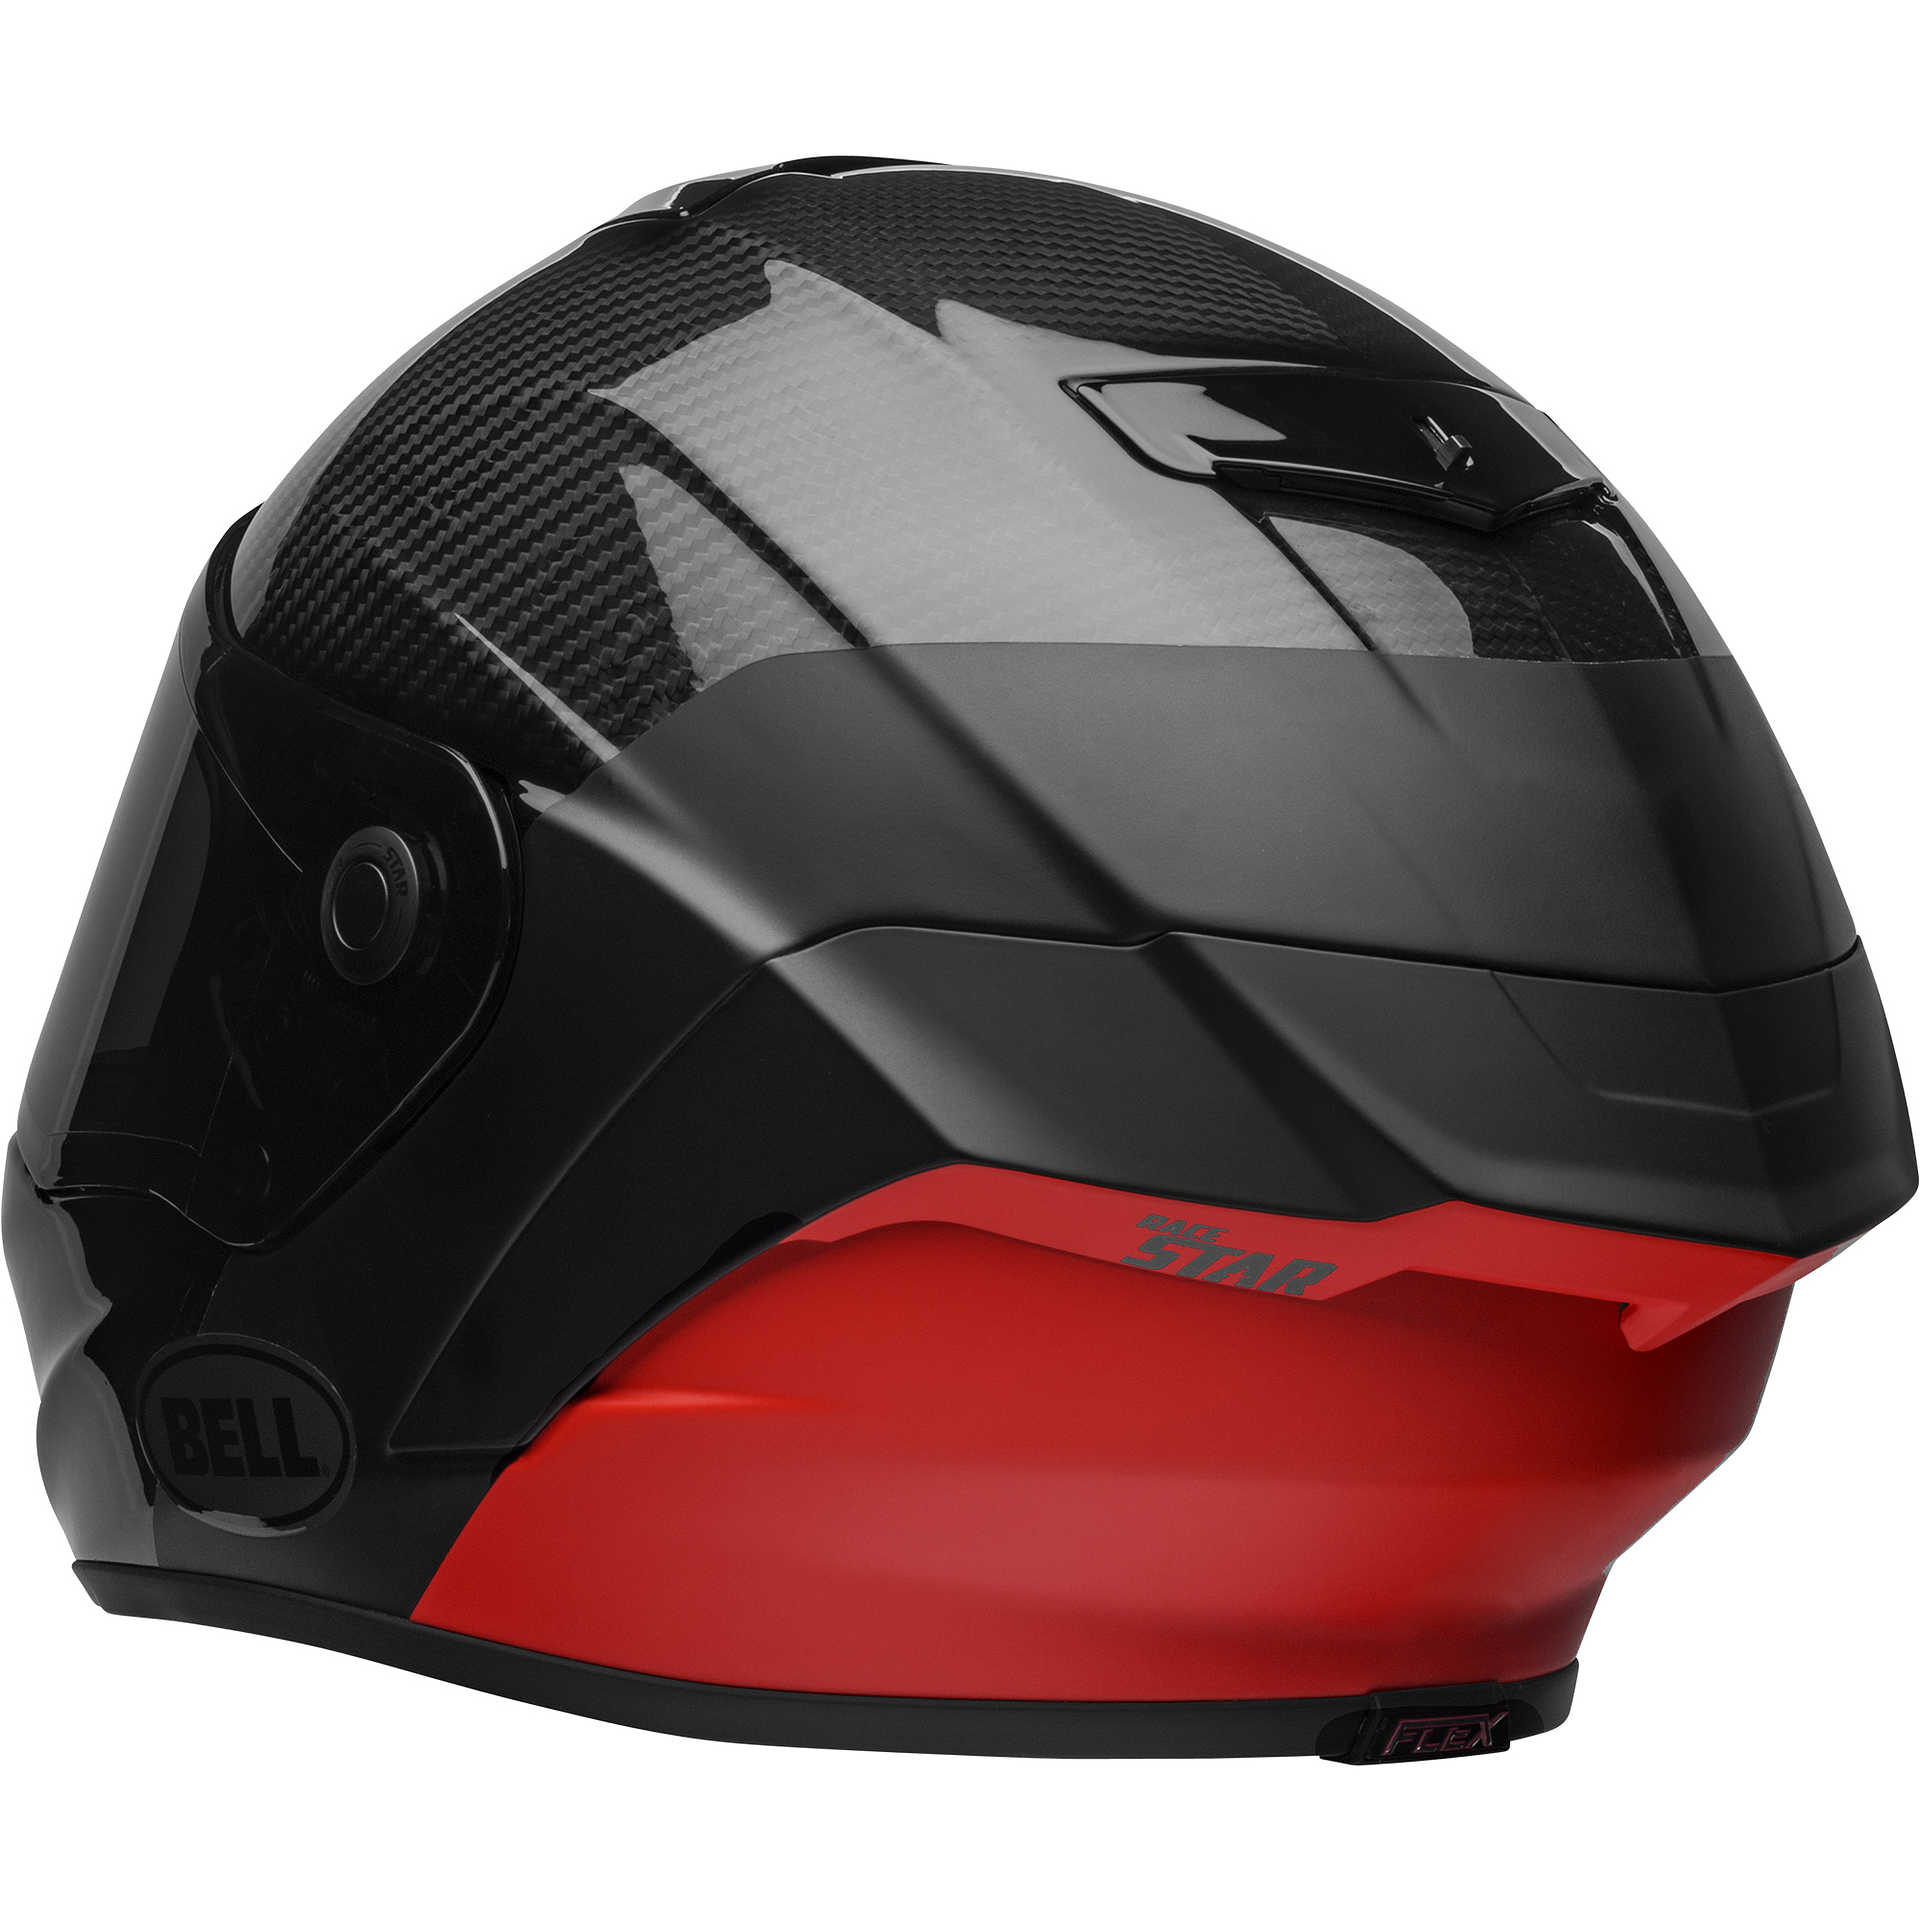 Integral Motorcycle Helmet Bell RACE STAR DLX LUX Black Red Matt Glossy For  Sale Online - Outletmoto.eu